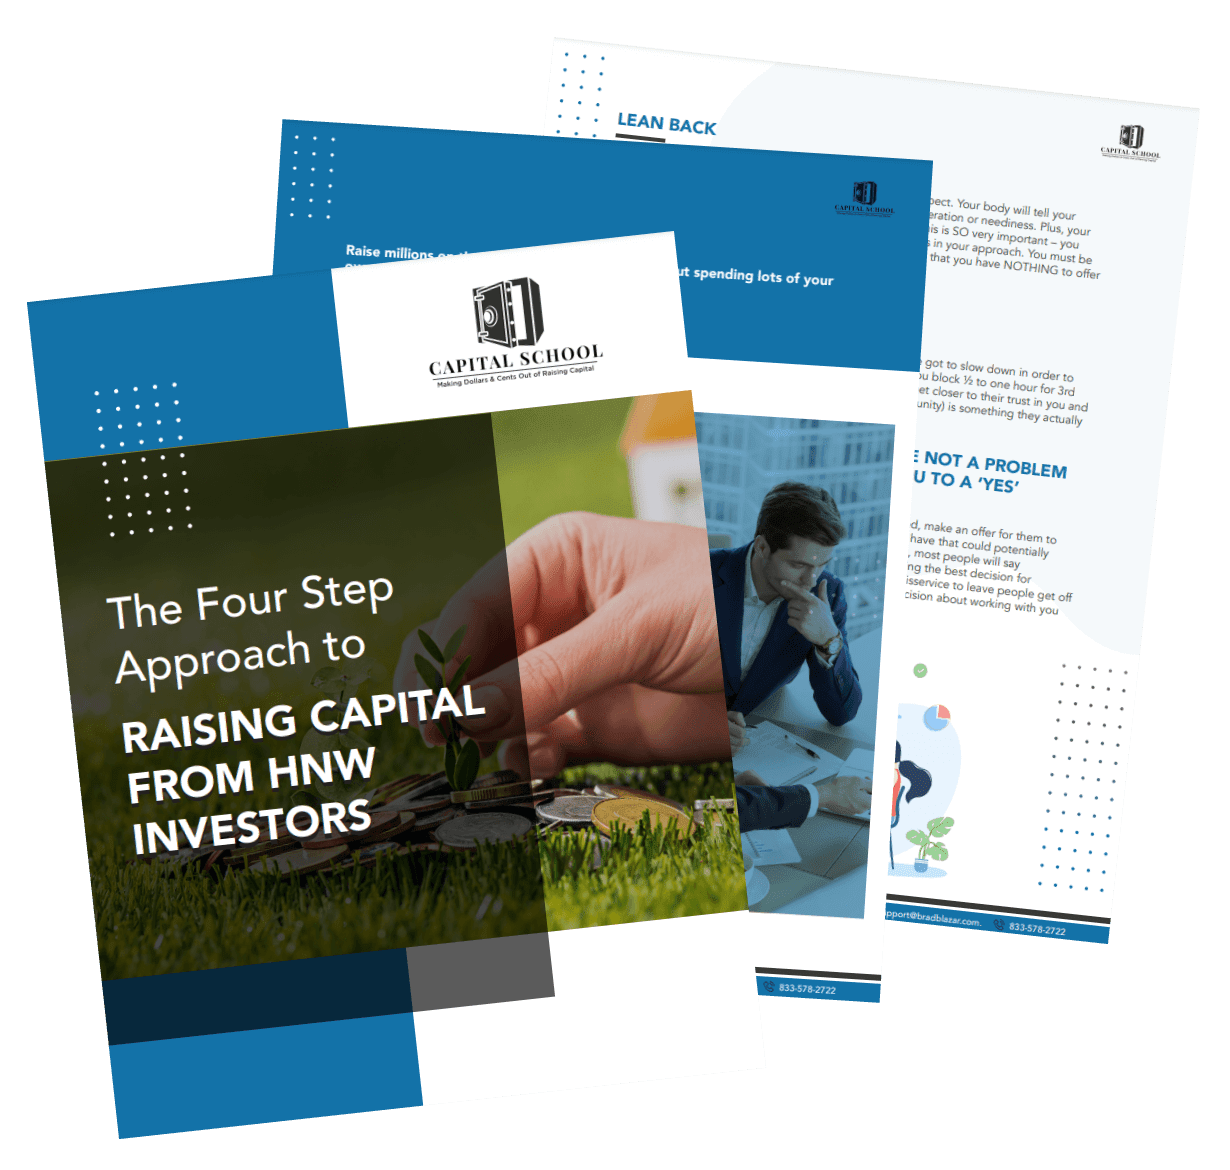 the four step approach to raising capital from high net worth investors